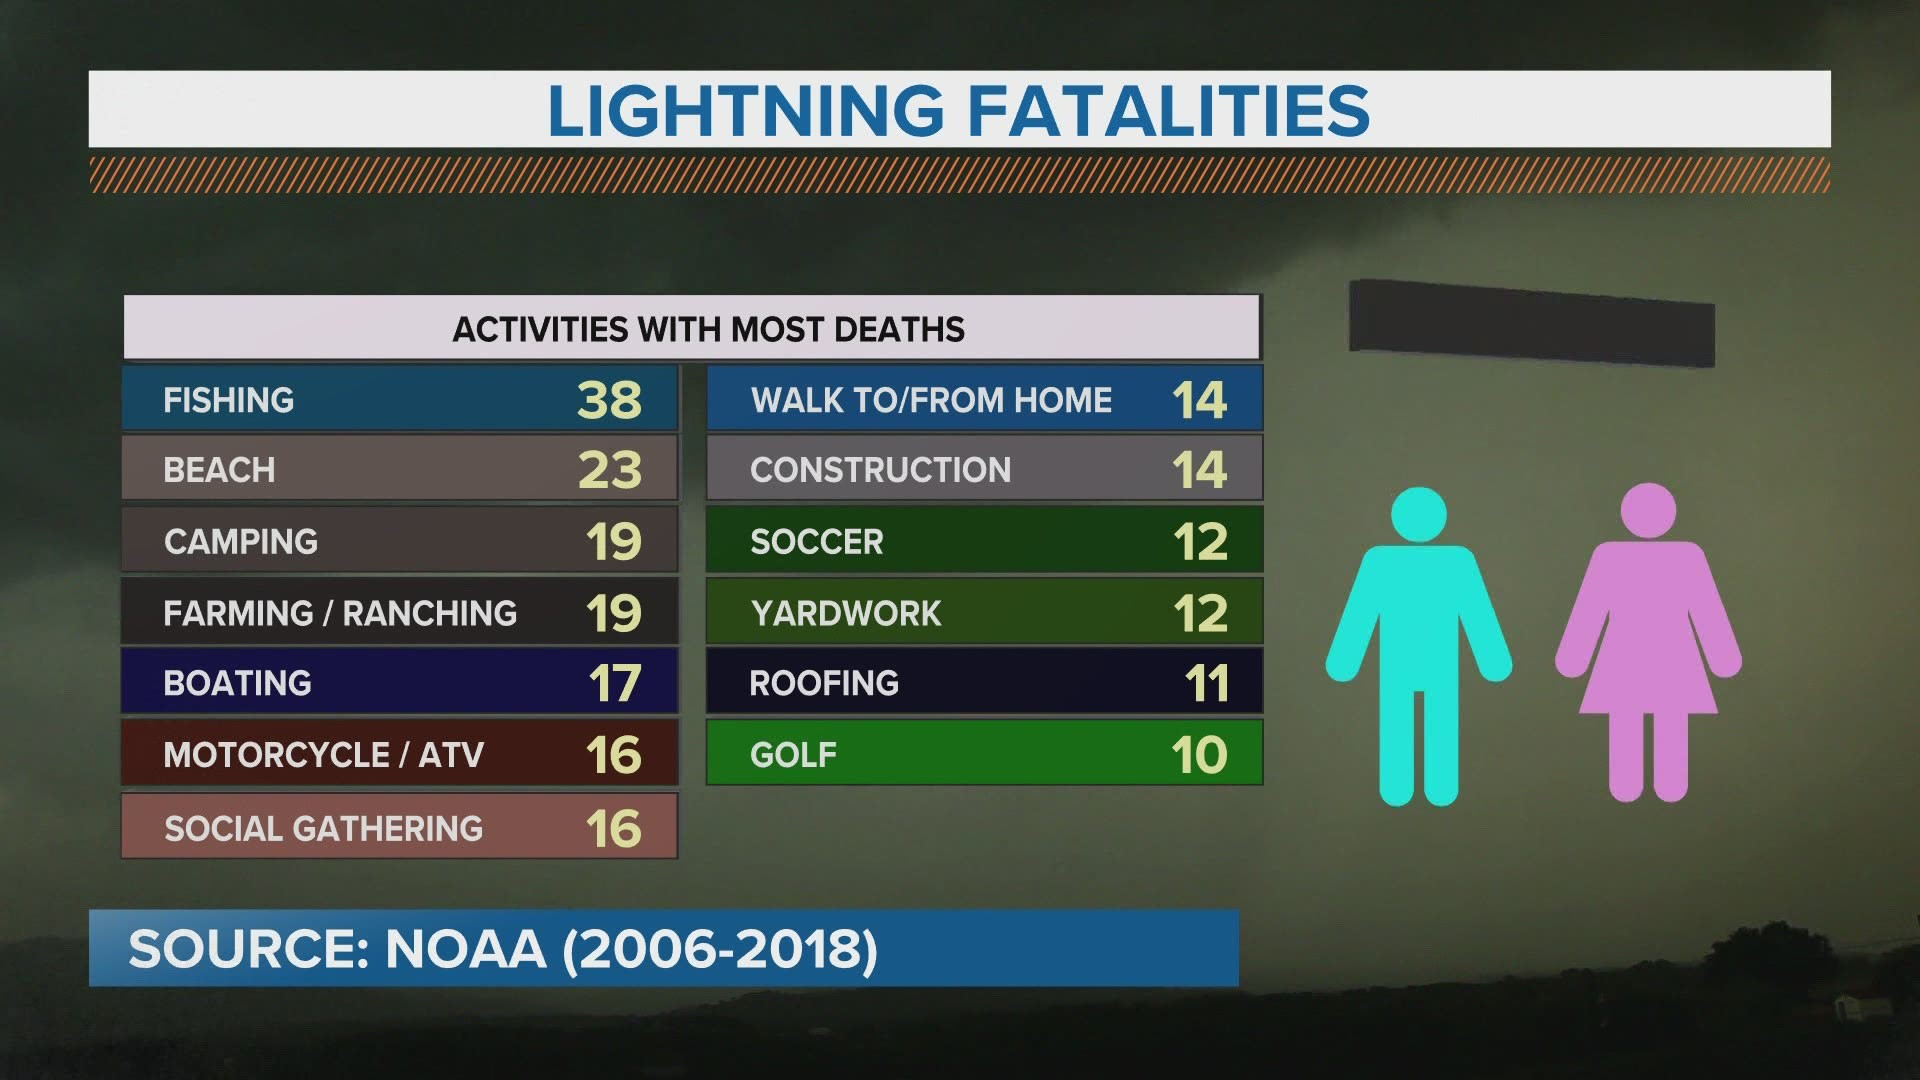 Lightning is one of the most common and underrated severe weather phenomenon. Whether you're inside or out, taking your safety seriously is key.